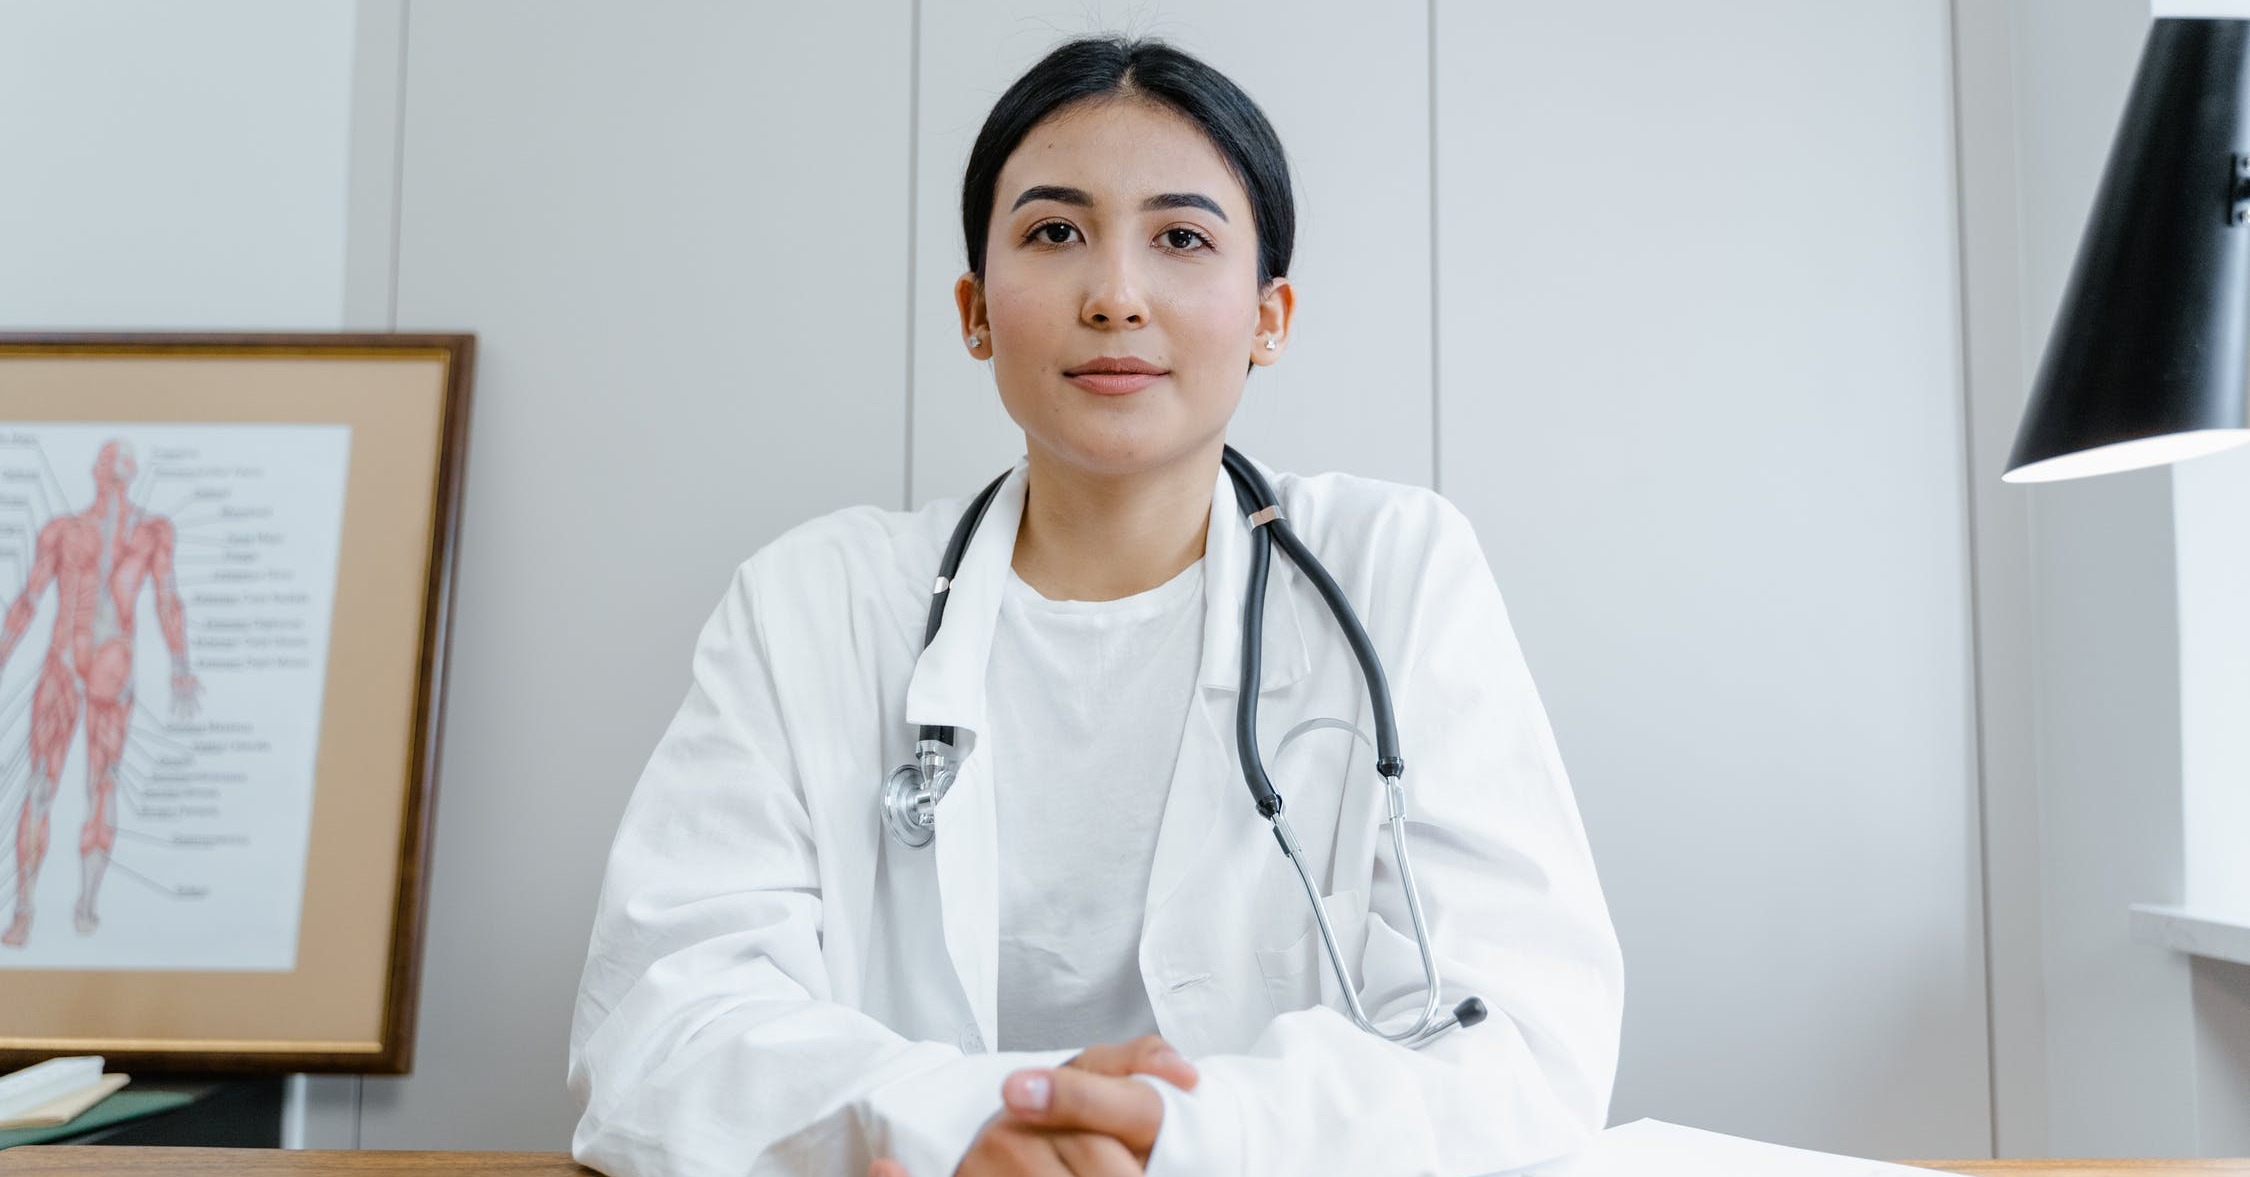 Physician Assistant Specializations